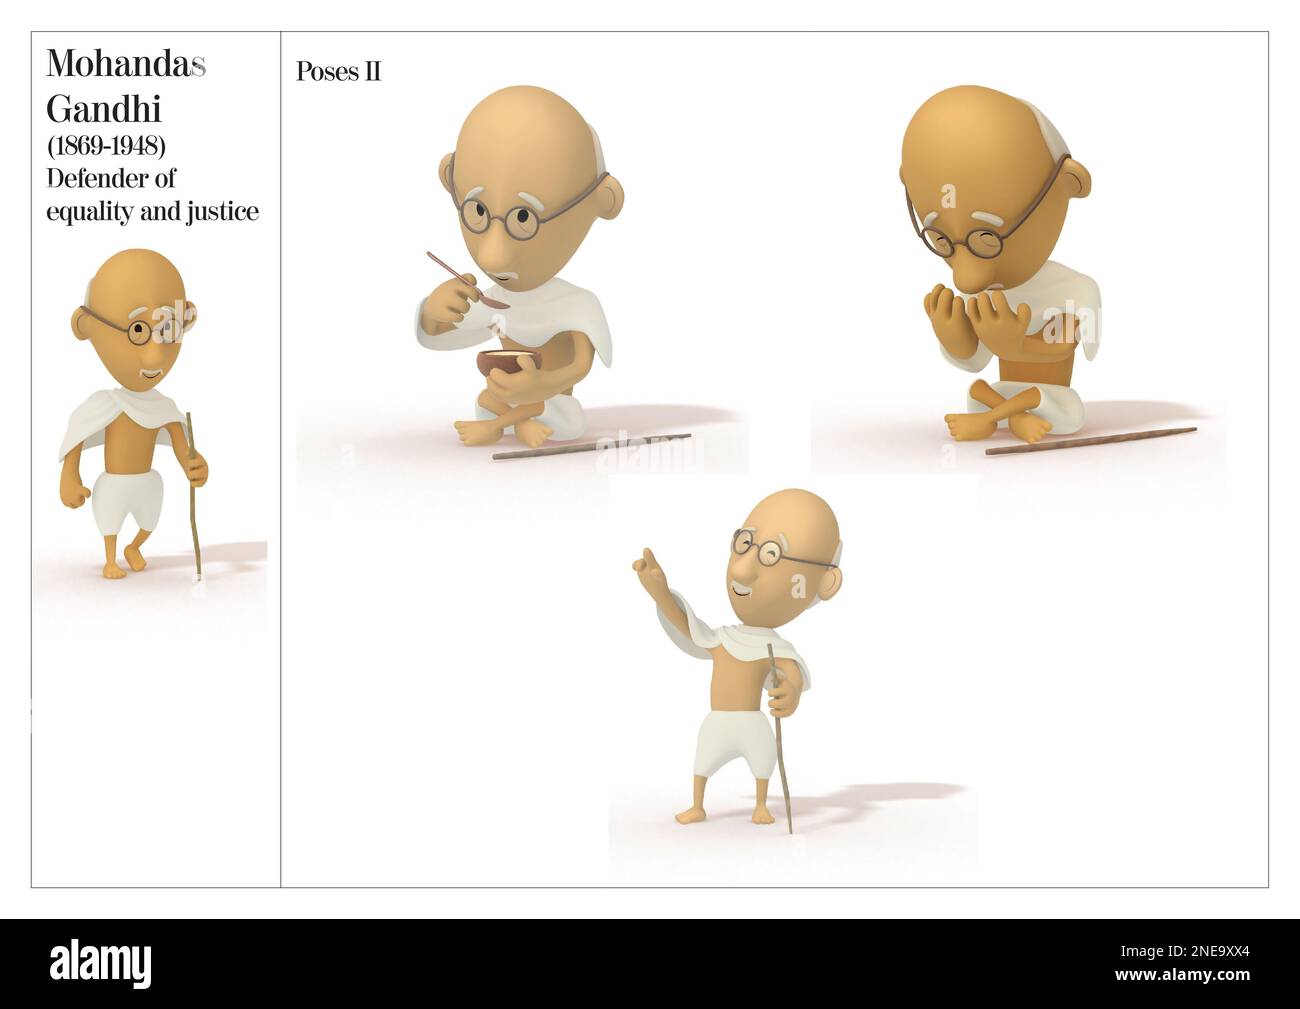 Postural pictures of Mohandas Gandhi, defender of equality and justice, (1869-1948). [Adobe InDesign (.indd)]. Stock Photo